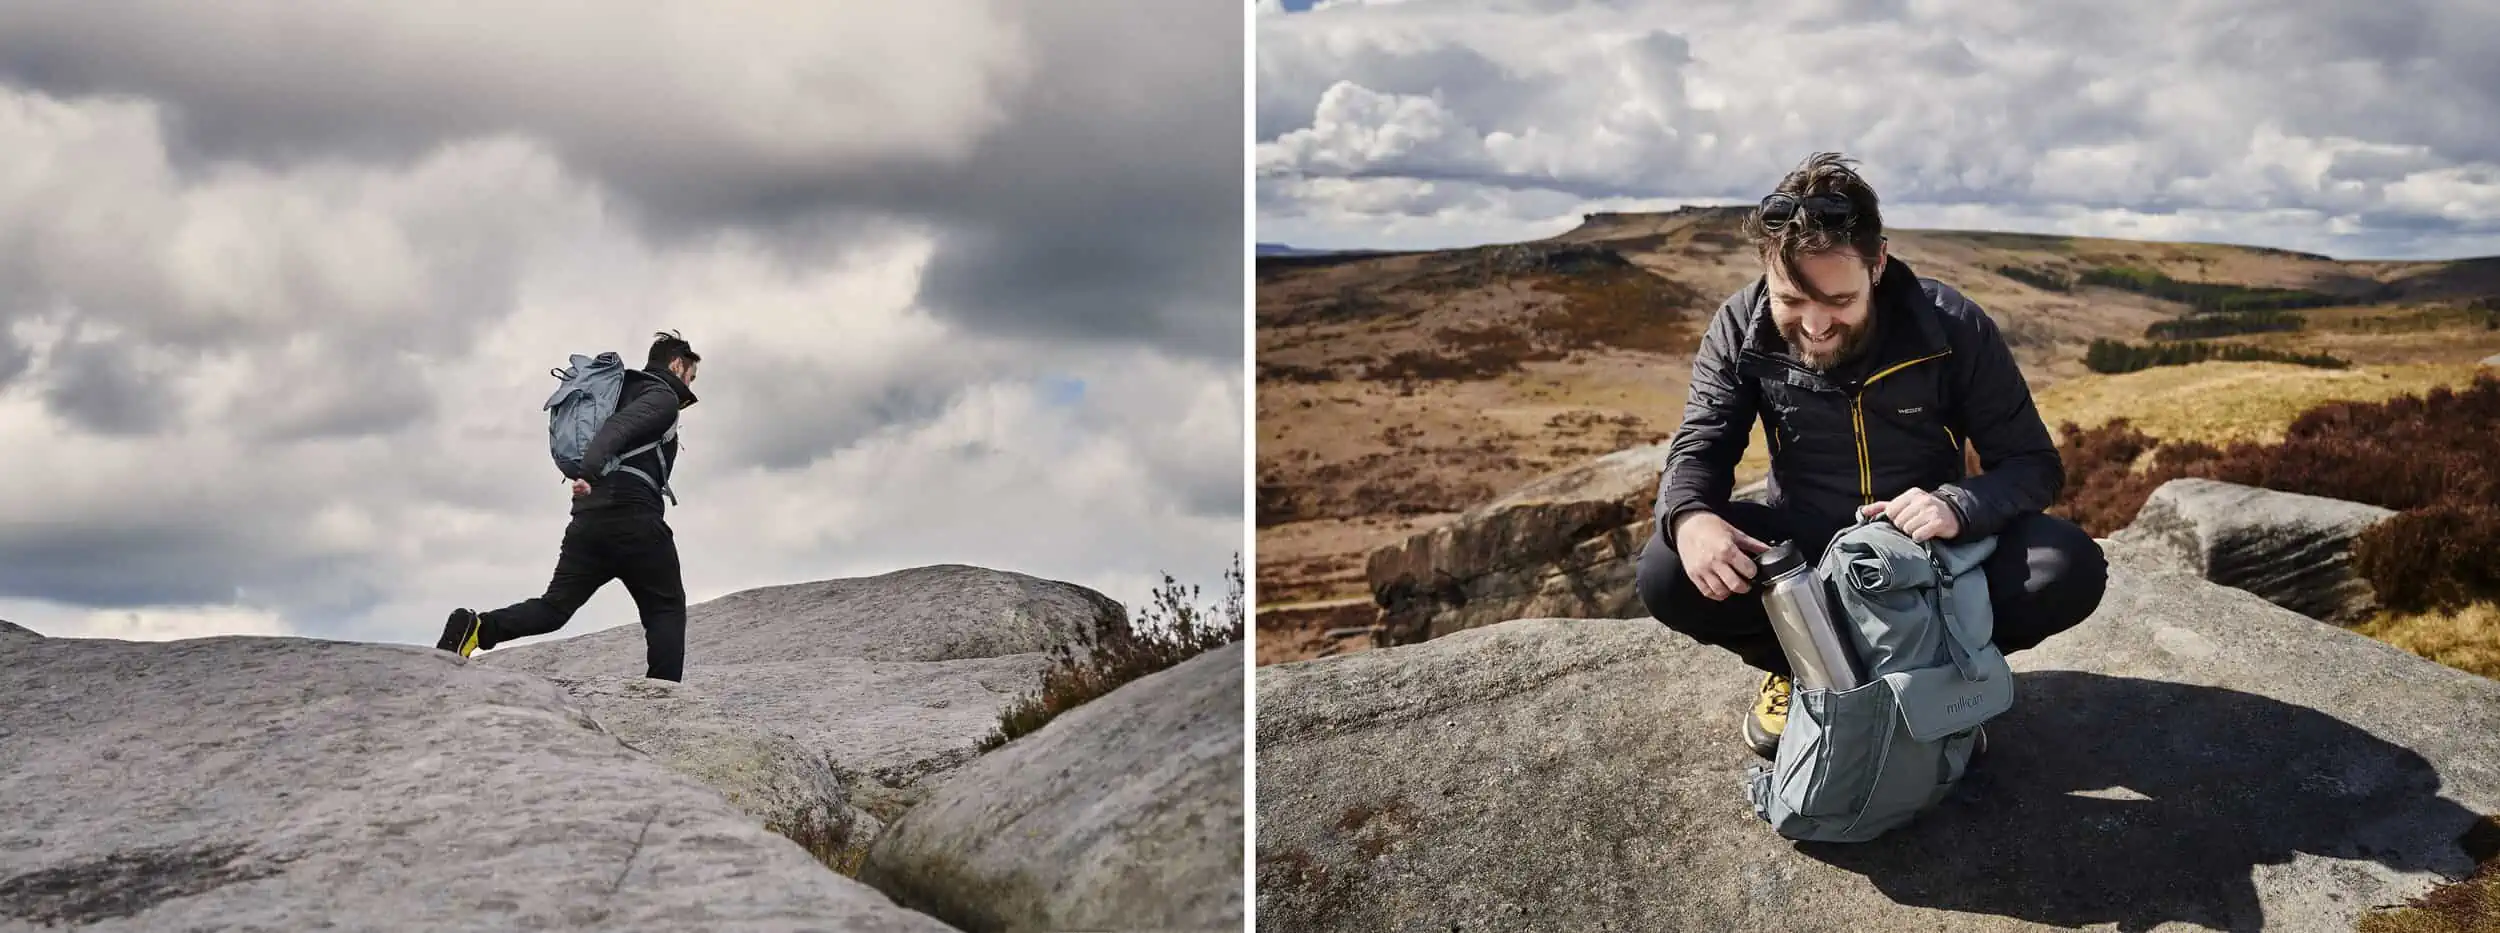 Image description: From left to right – 01: A landscape image. The scene is minimal with a dark cloudy sky and rocks in the foreground. Matt is caught mid action as he jumps from rock to rock. He wears black trousers, a black coat and a Millican ‘The Mavericks’ Smith the Roll 15l pack in Tarn. 02: A landscape image. Matt crouches down with his Millican ‘The Mavericks’ Smith the Roll 15l pack in Tarn. He lifts a titanium water bottle from the side pouch. He smiles. The background is mountainous with browns, greens and oranges in the surrounding hills.&nbsp;